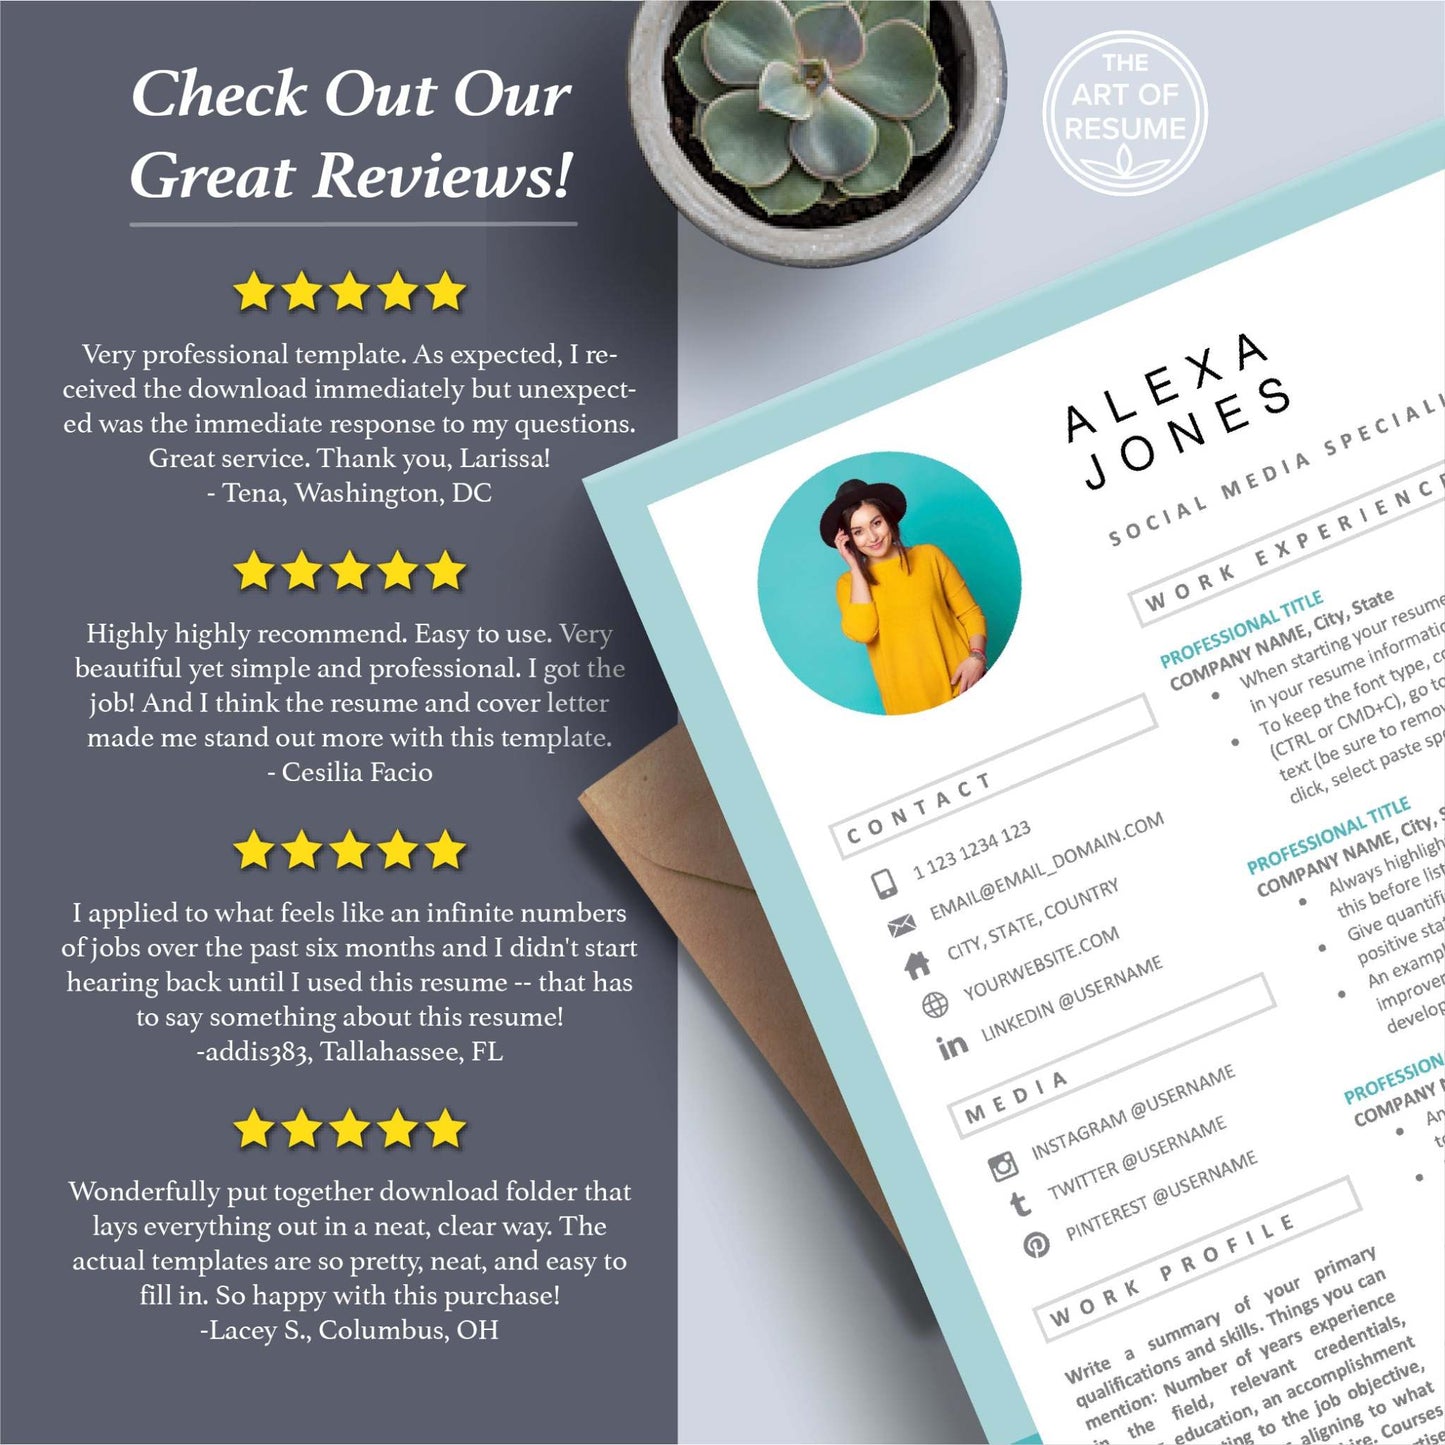 The Art of Resume Templates | Professional Teal Blue Resume CV Design Template with Photo Picture Online 5-Star Reviews